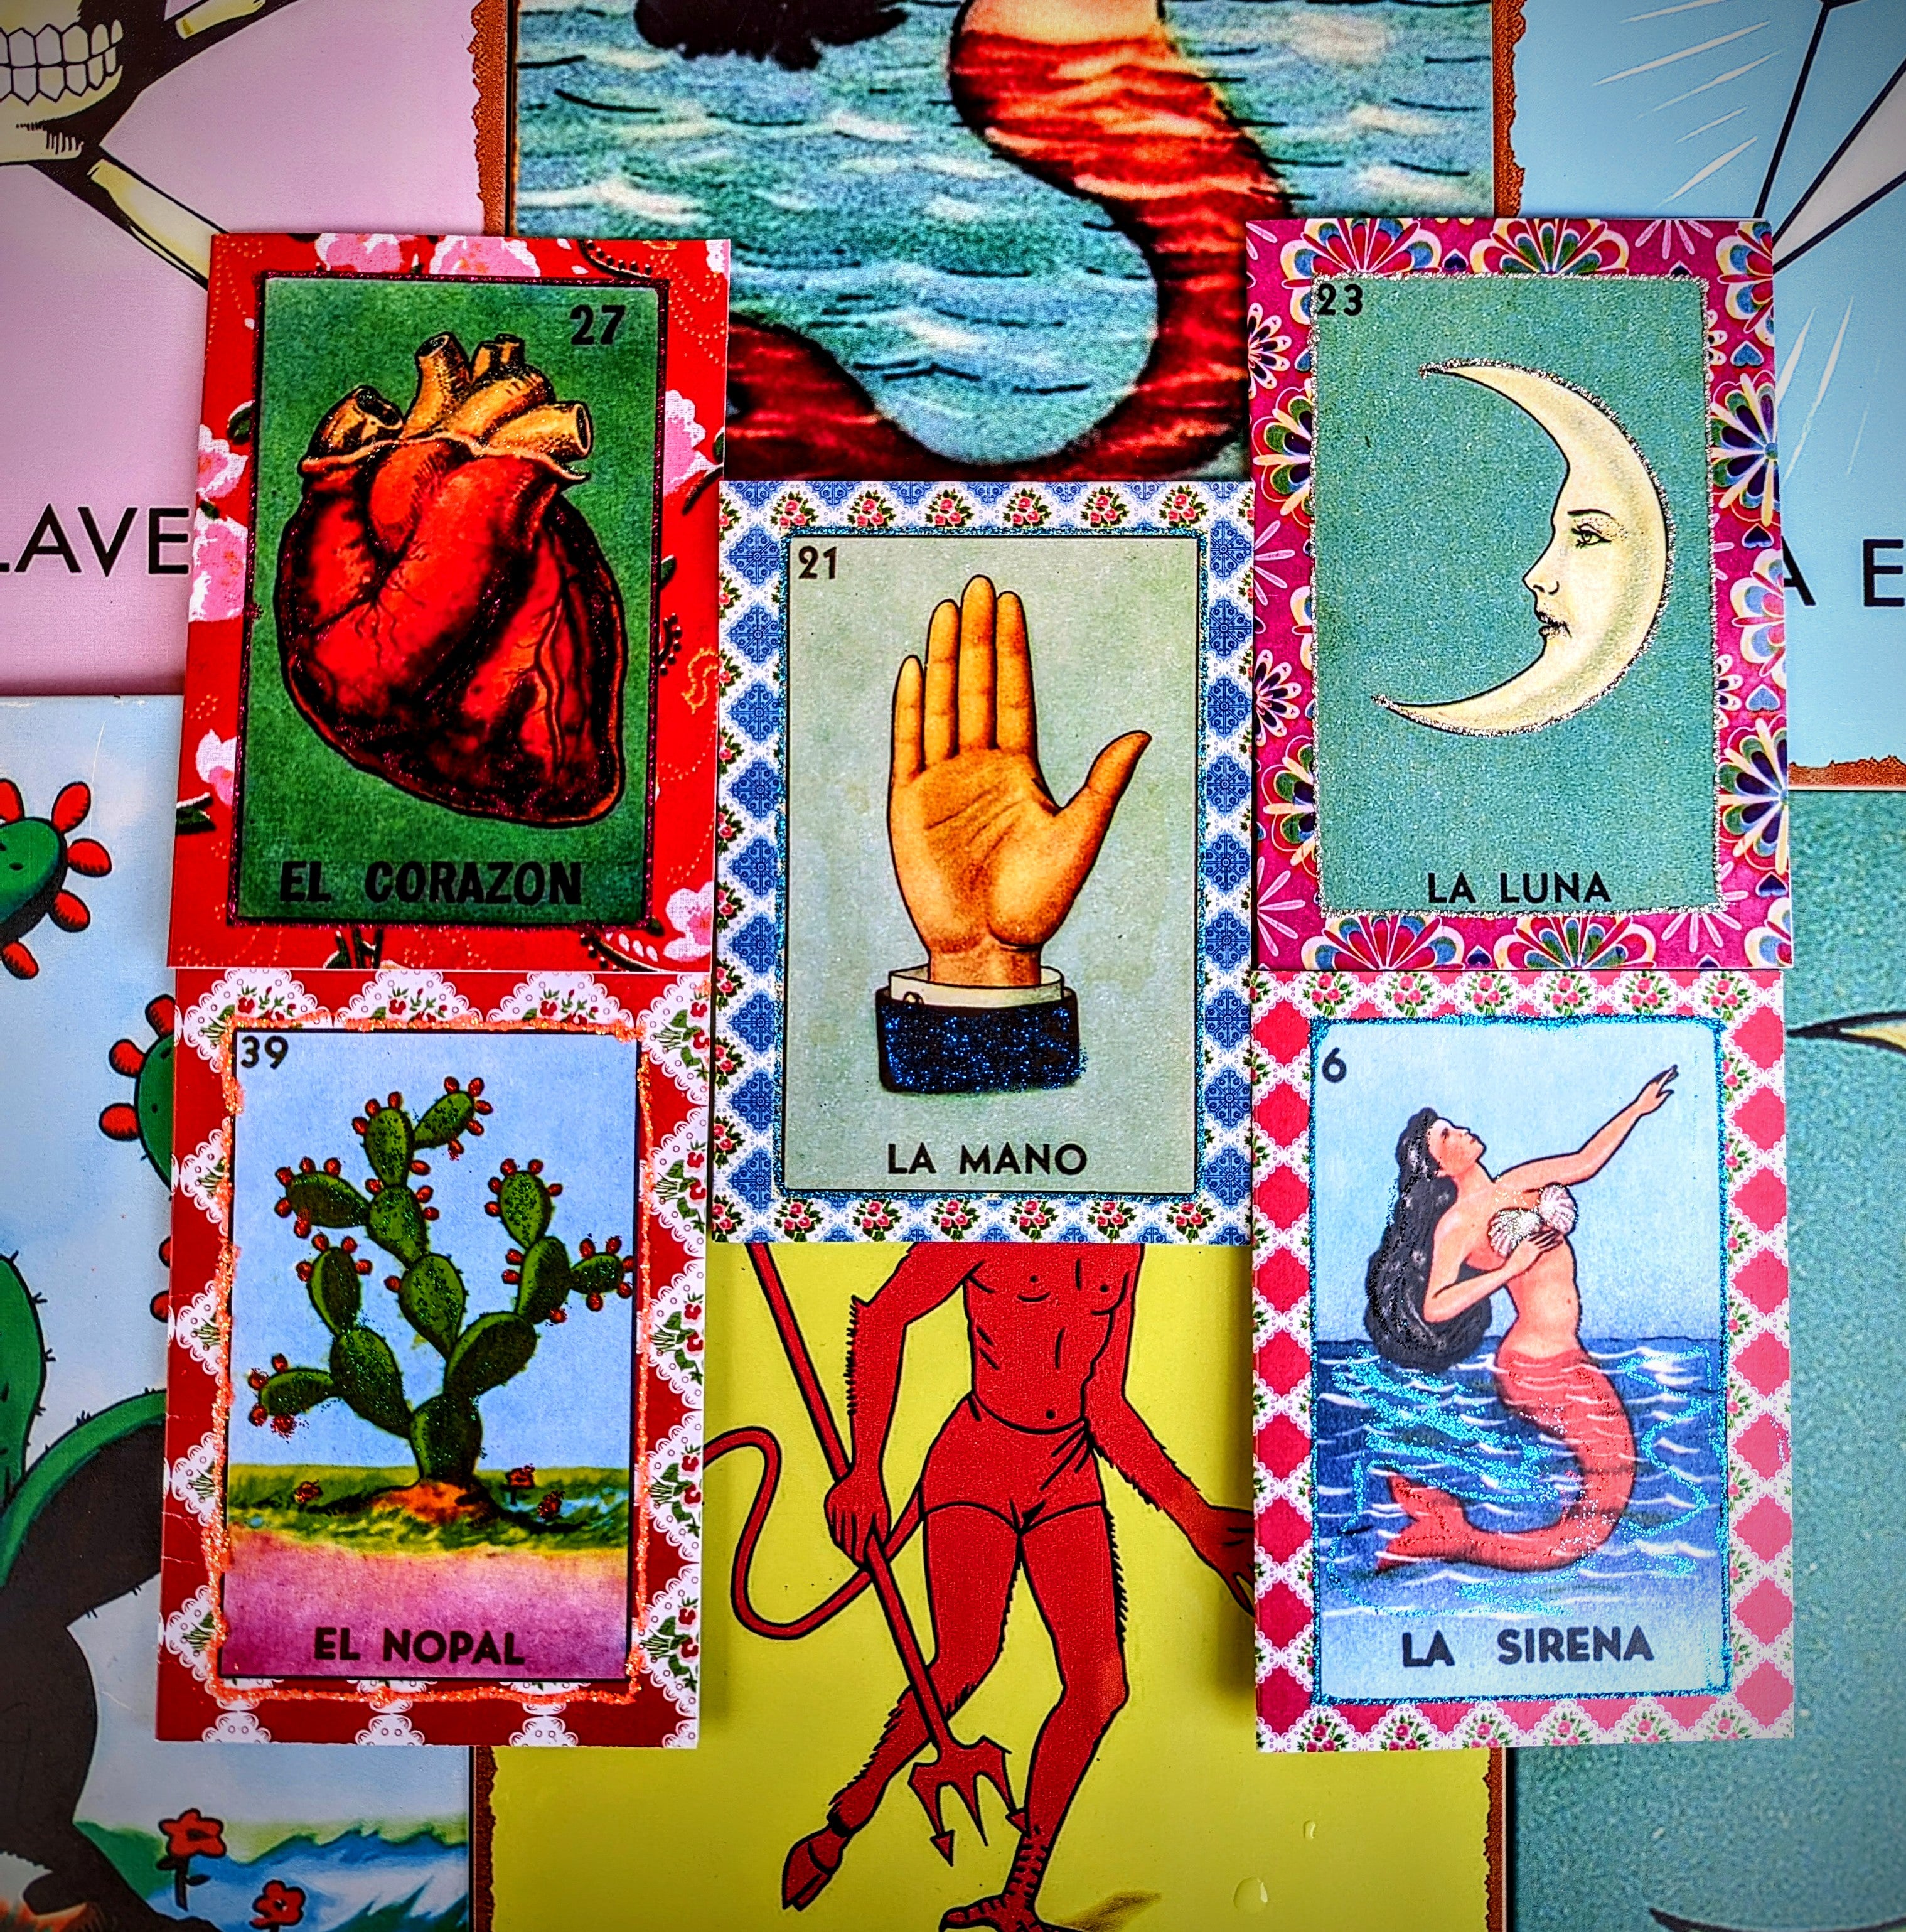 A set of five hand glittered greetings cards of iconic Mexican images from the game Loteria.
Lotteria cards
Mexican cards
Nopal
Sirena
Mano
